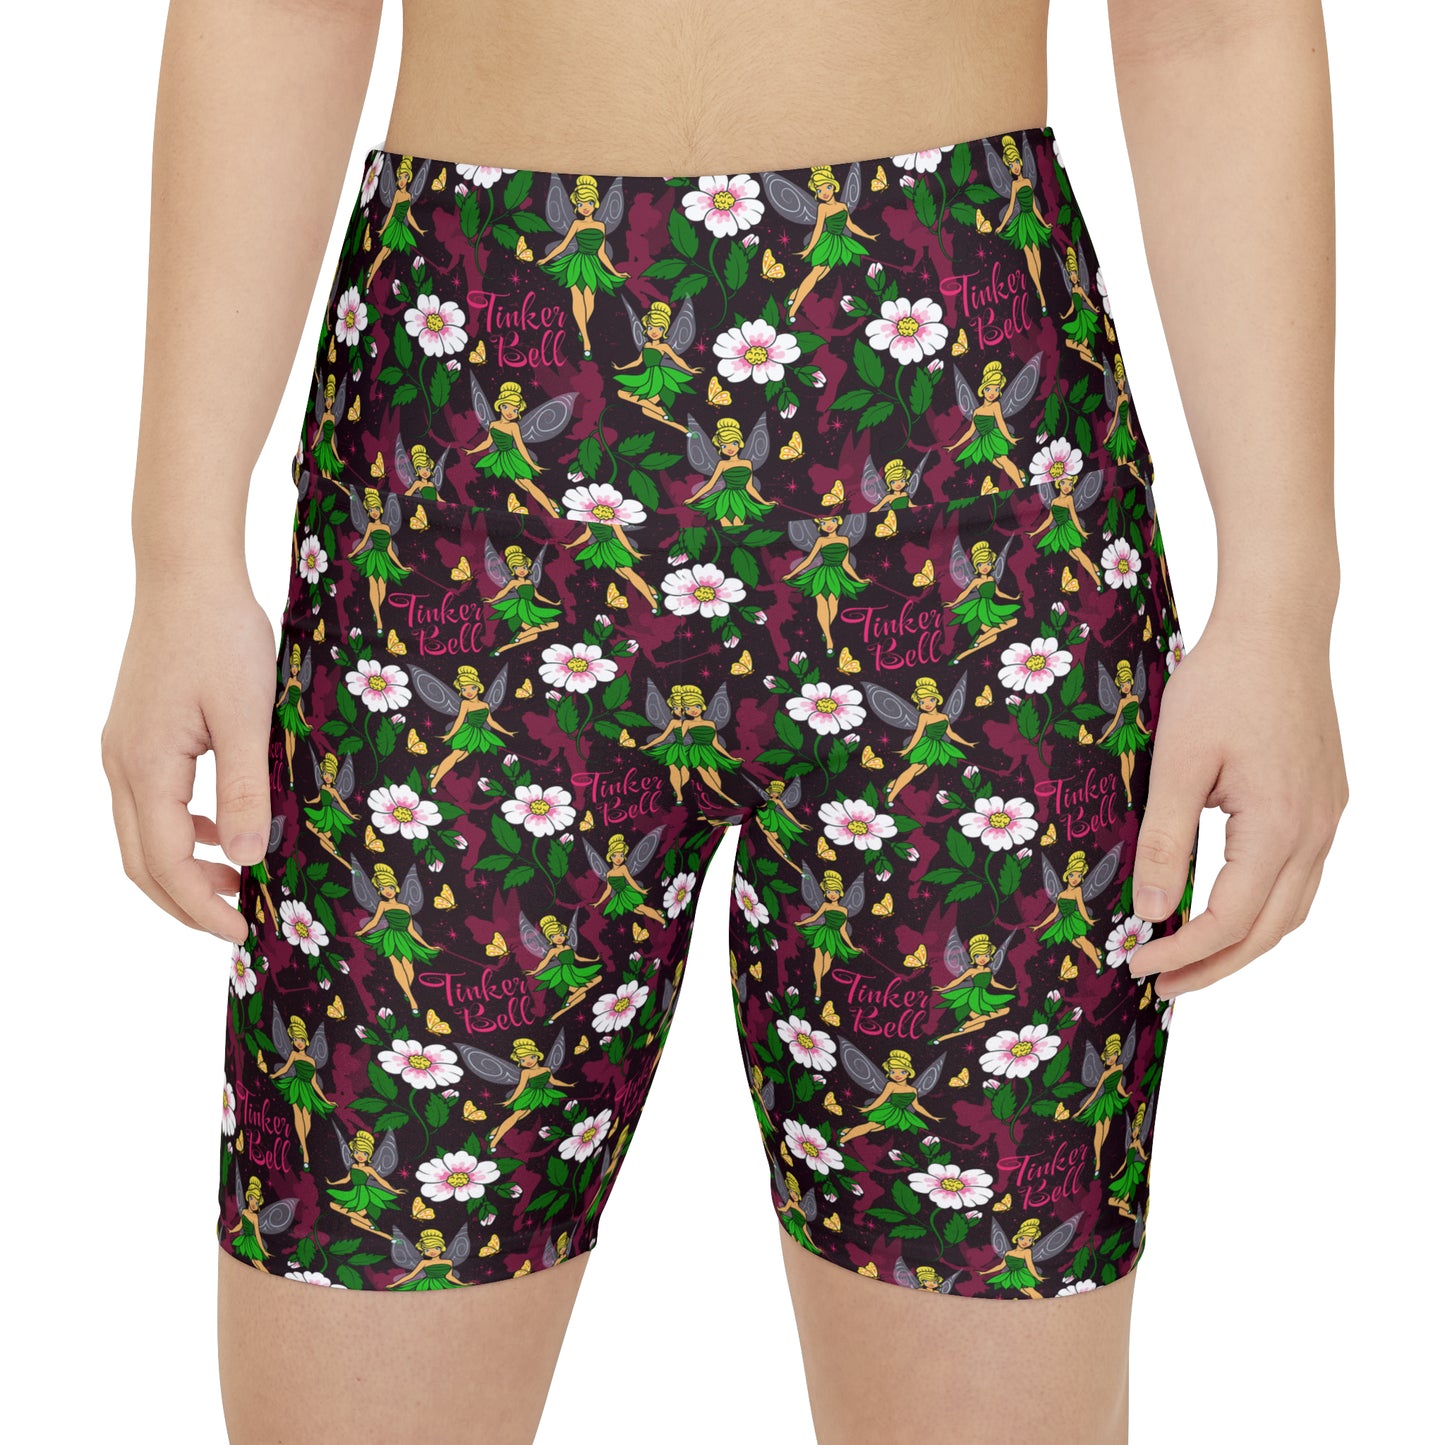 Tinker Bell Women's Athletic Workout Shorts